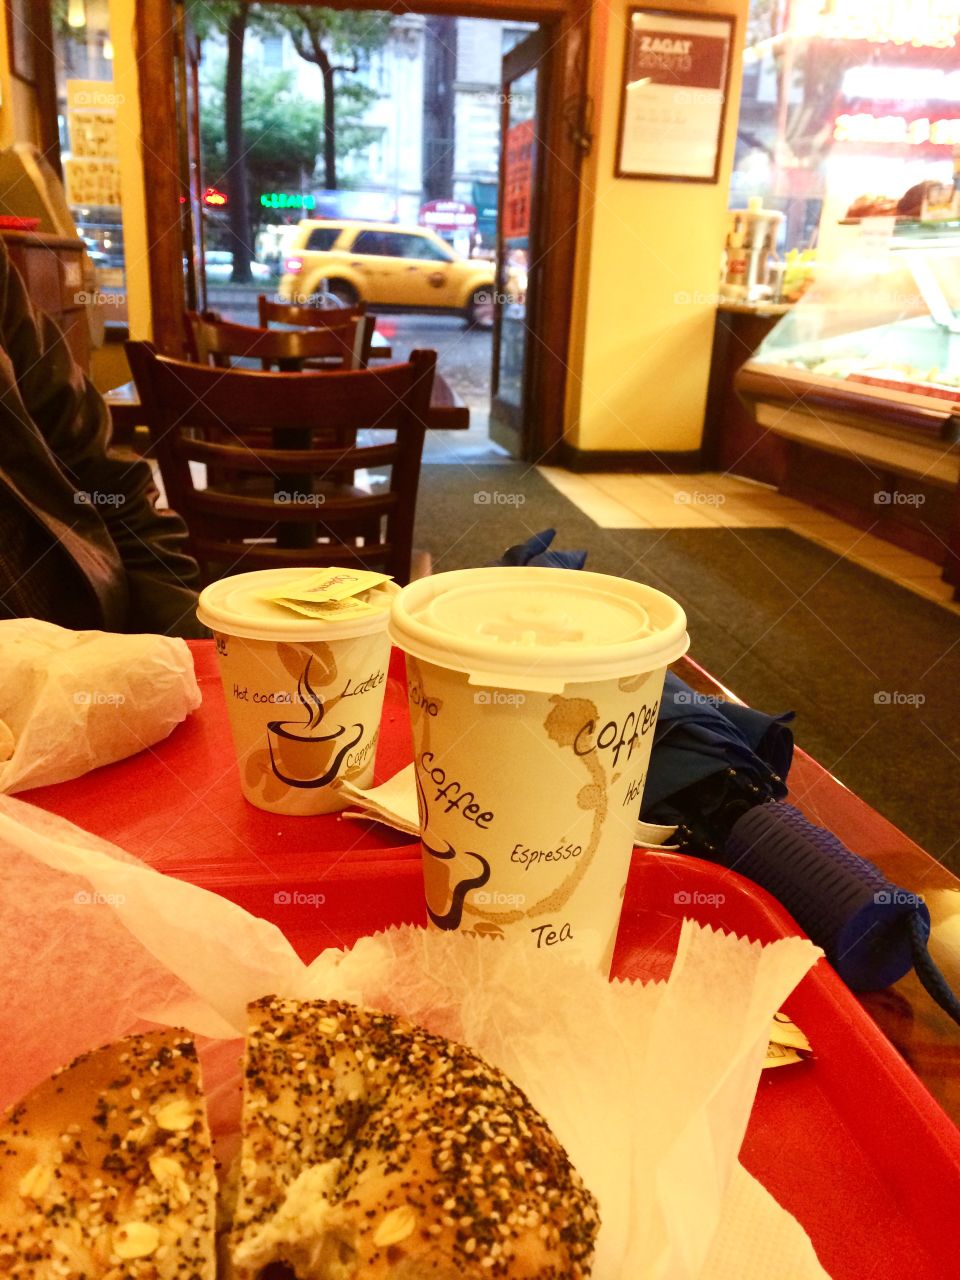 Rainy day bagels. Fresh bagels and coffee while looking out at a rainy New York Street